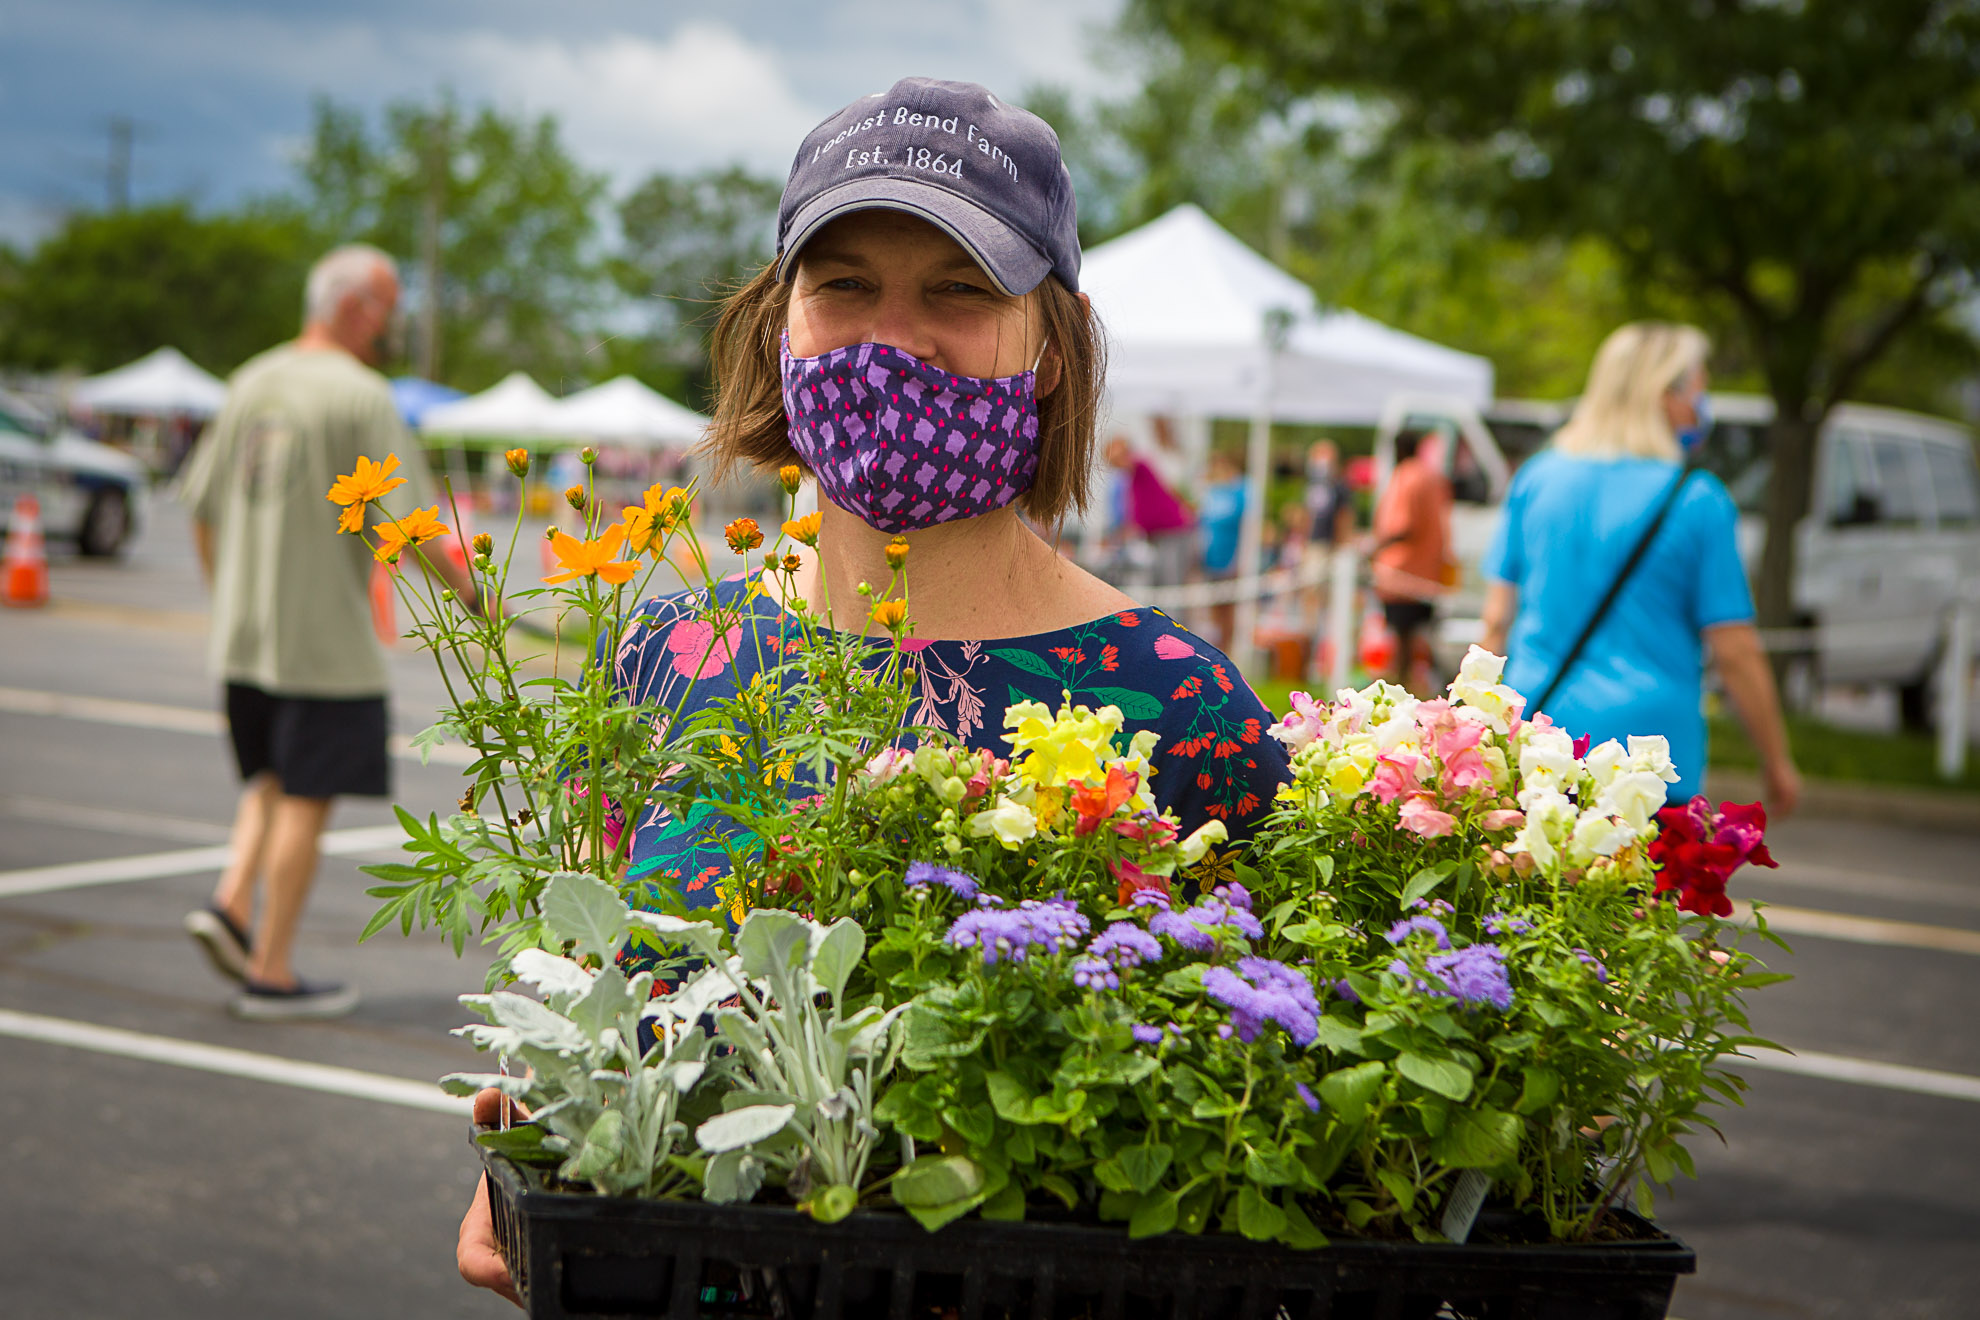 A vendor at the Lexington Farmers Market shows off some of the plants she has for sale, while wearing a mask to protect customers during the COVID-19 pandemic. Photo by Matt Barton